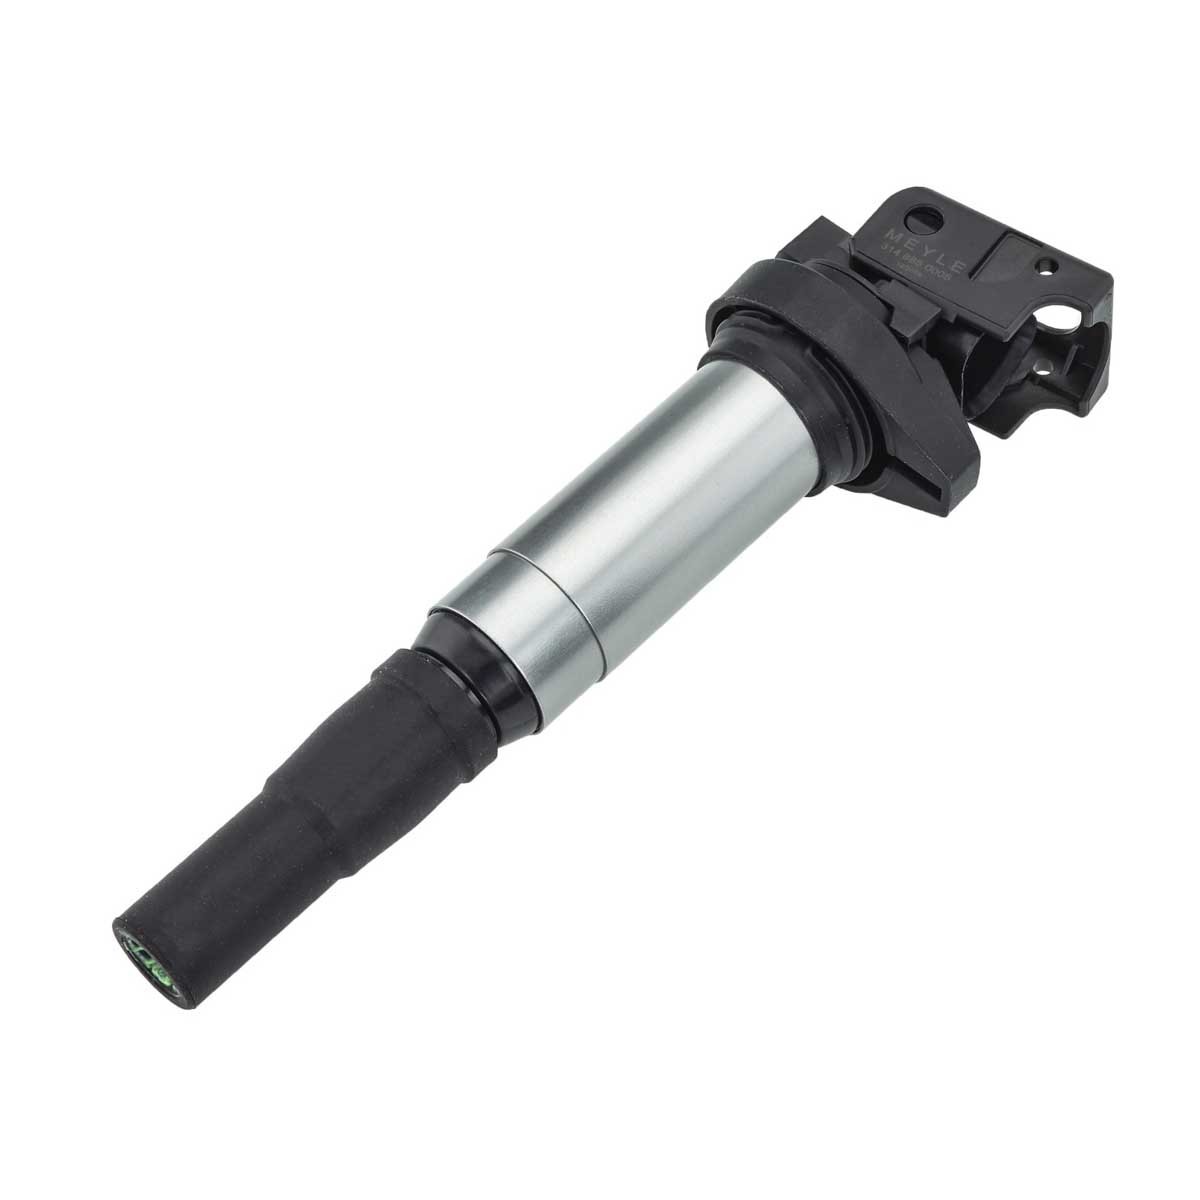 MIC0120 MEYLE 3148850005 Ignition coil 7575010